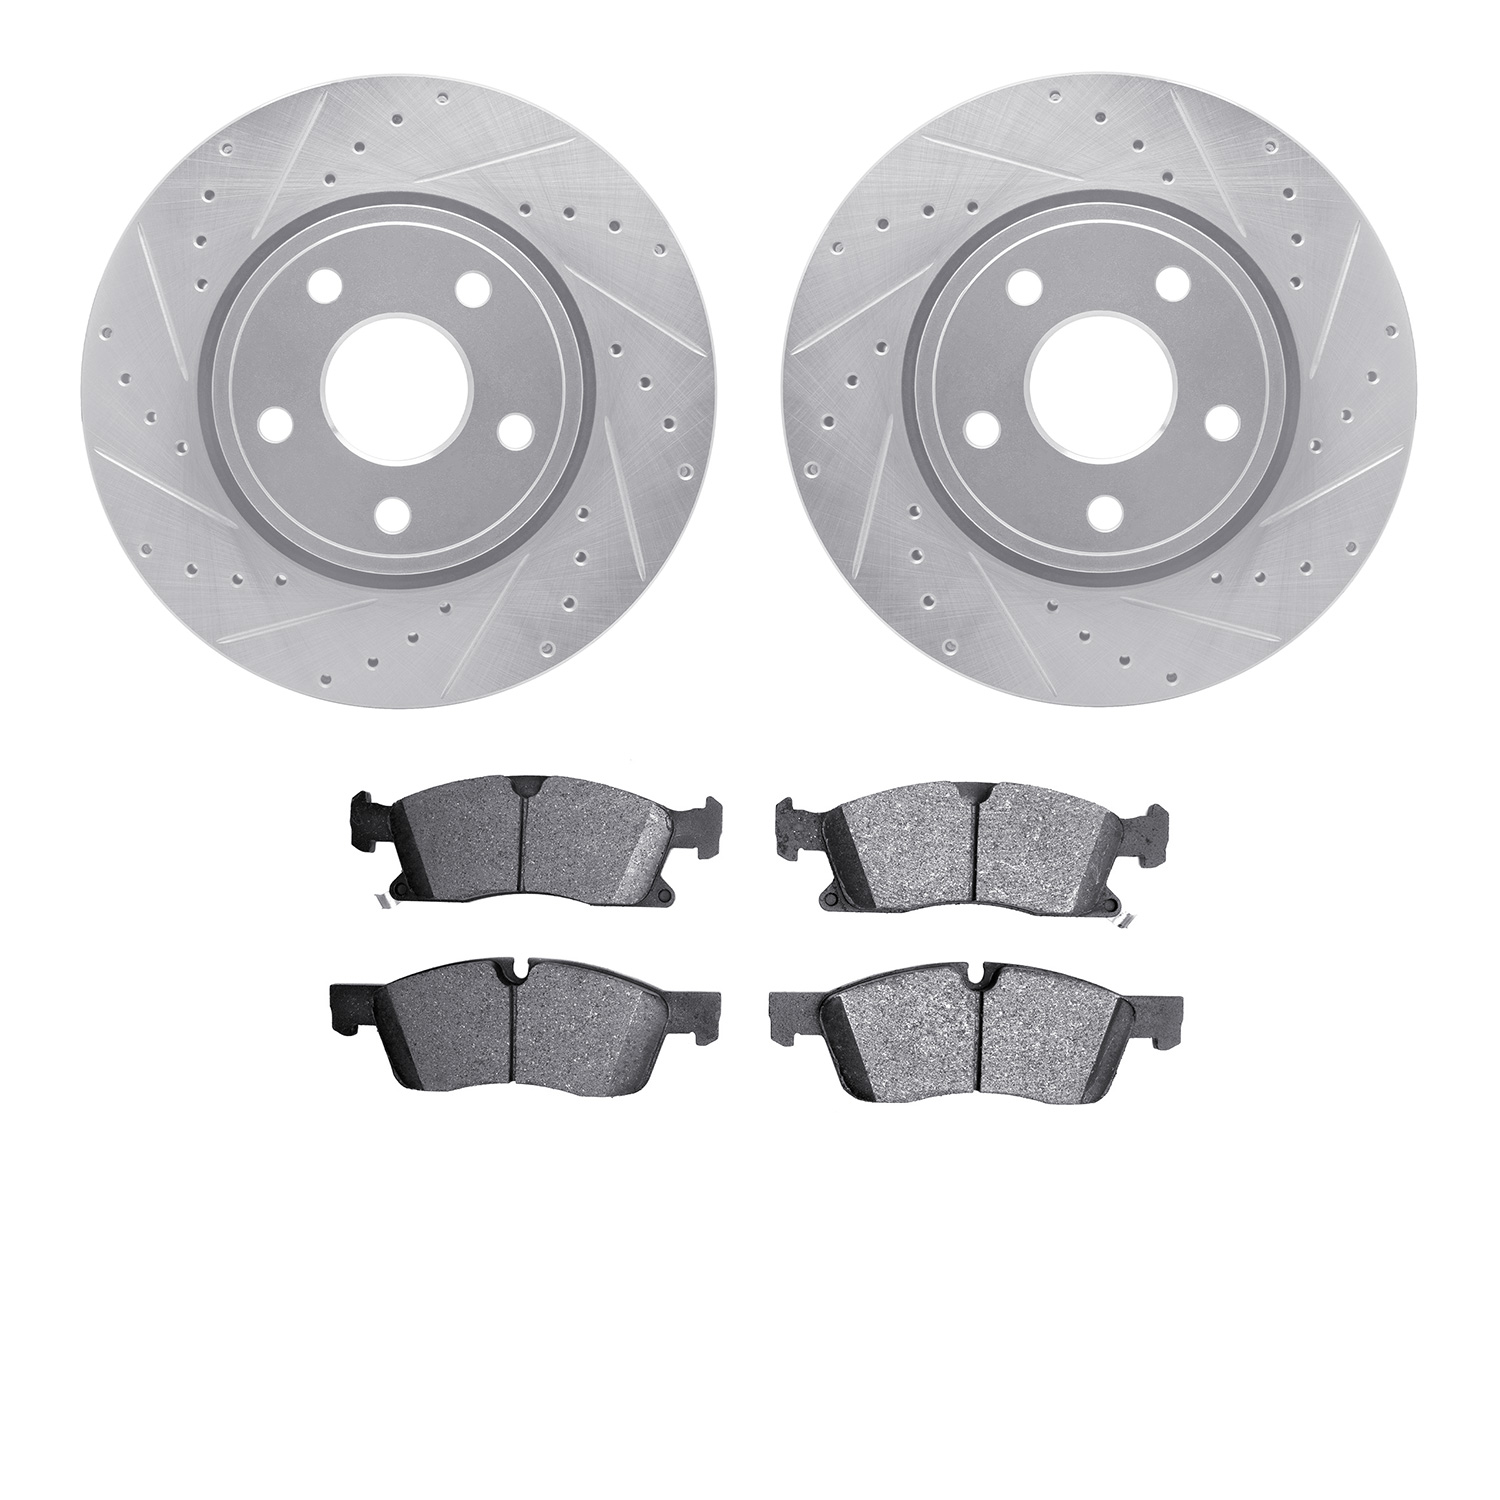 7202-42002 Drilled/Slotted Rotors w/Heavy-Duty Brake Pads Kit [Silver], Fits Select Mopar, Position: Front